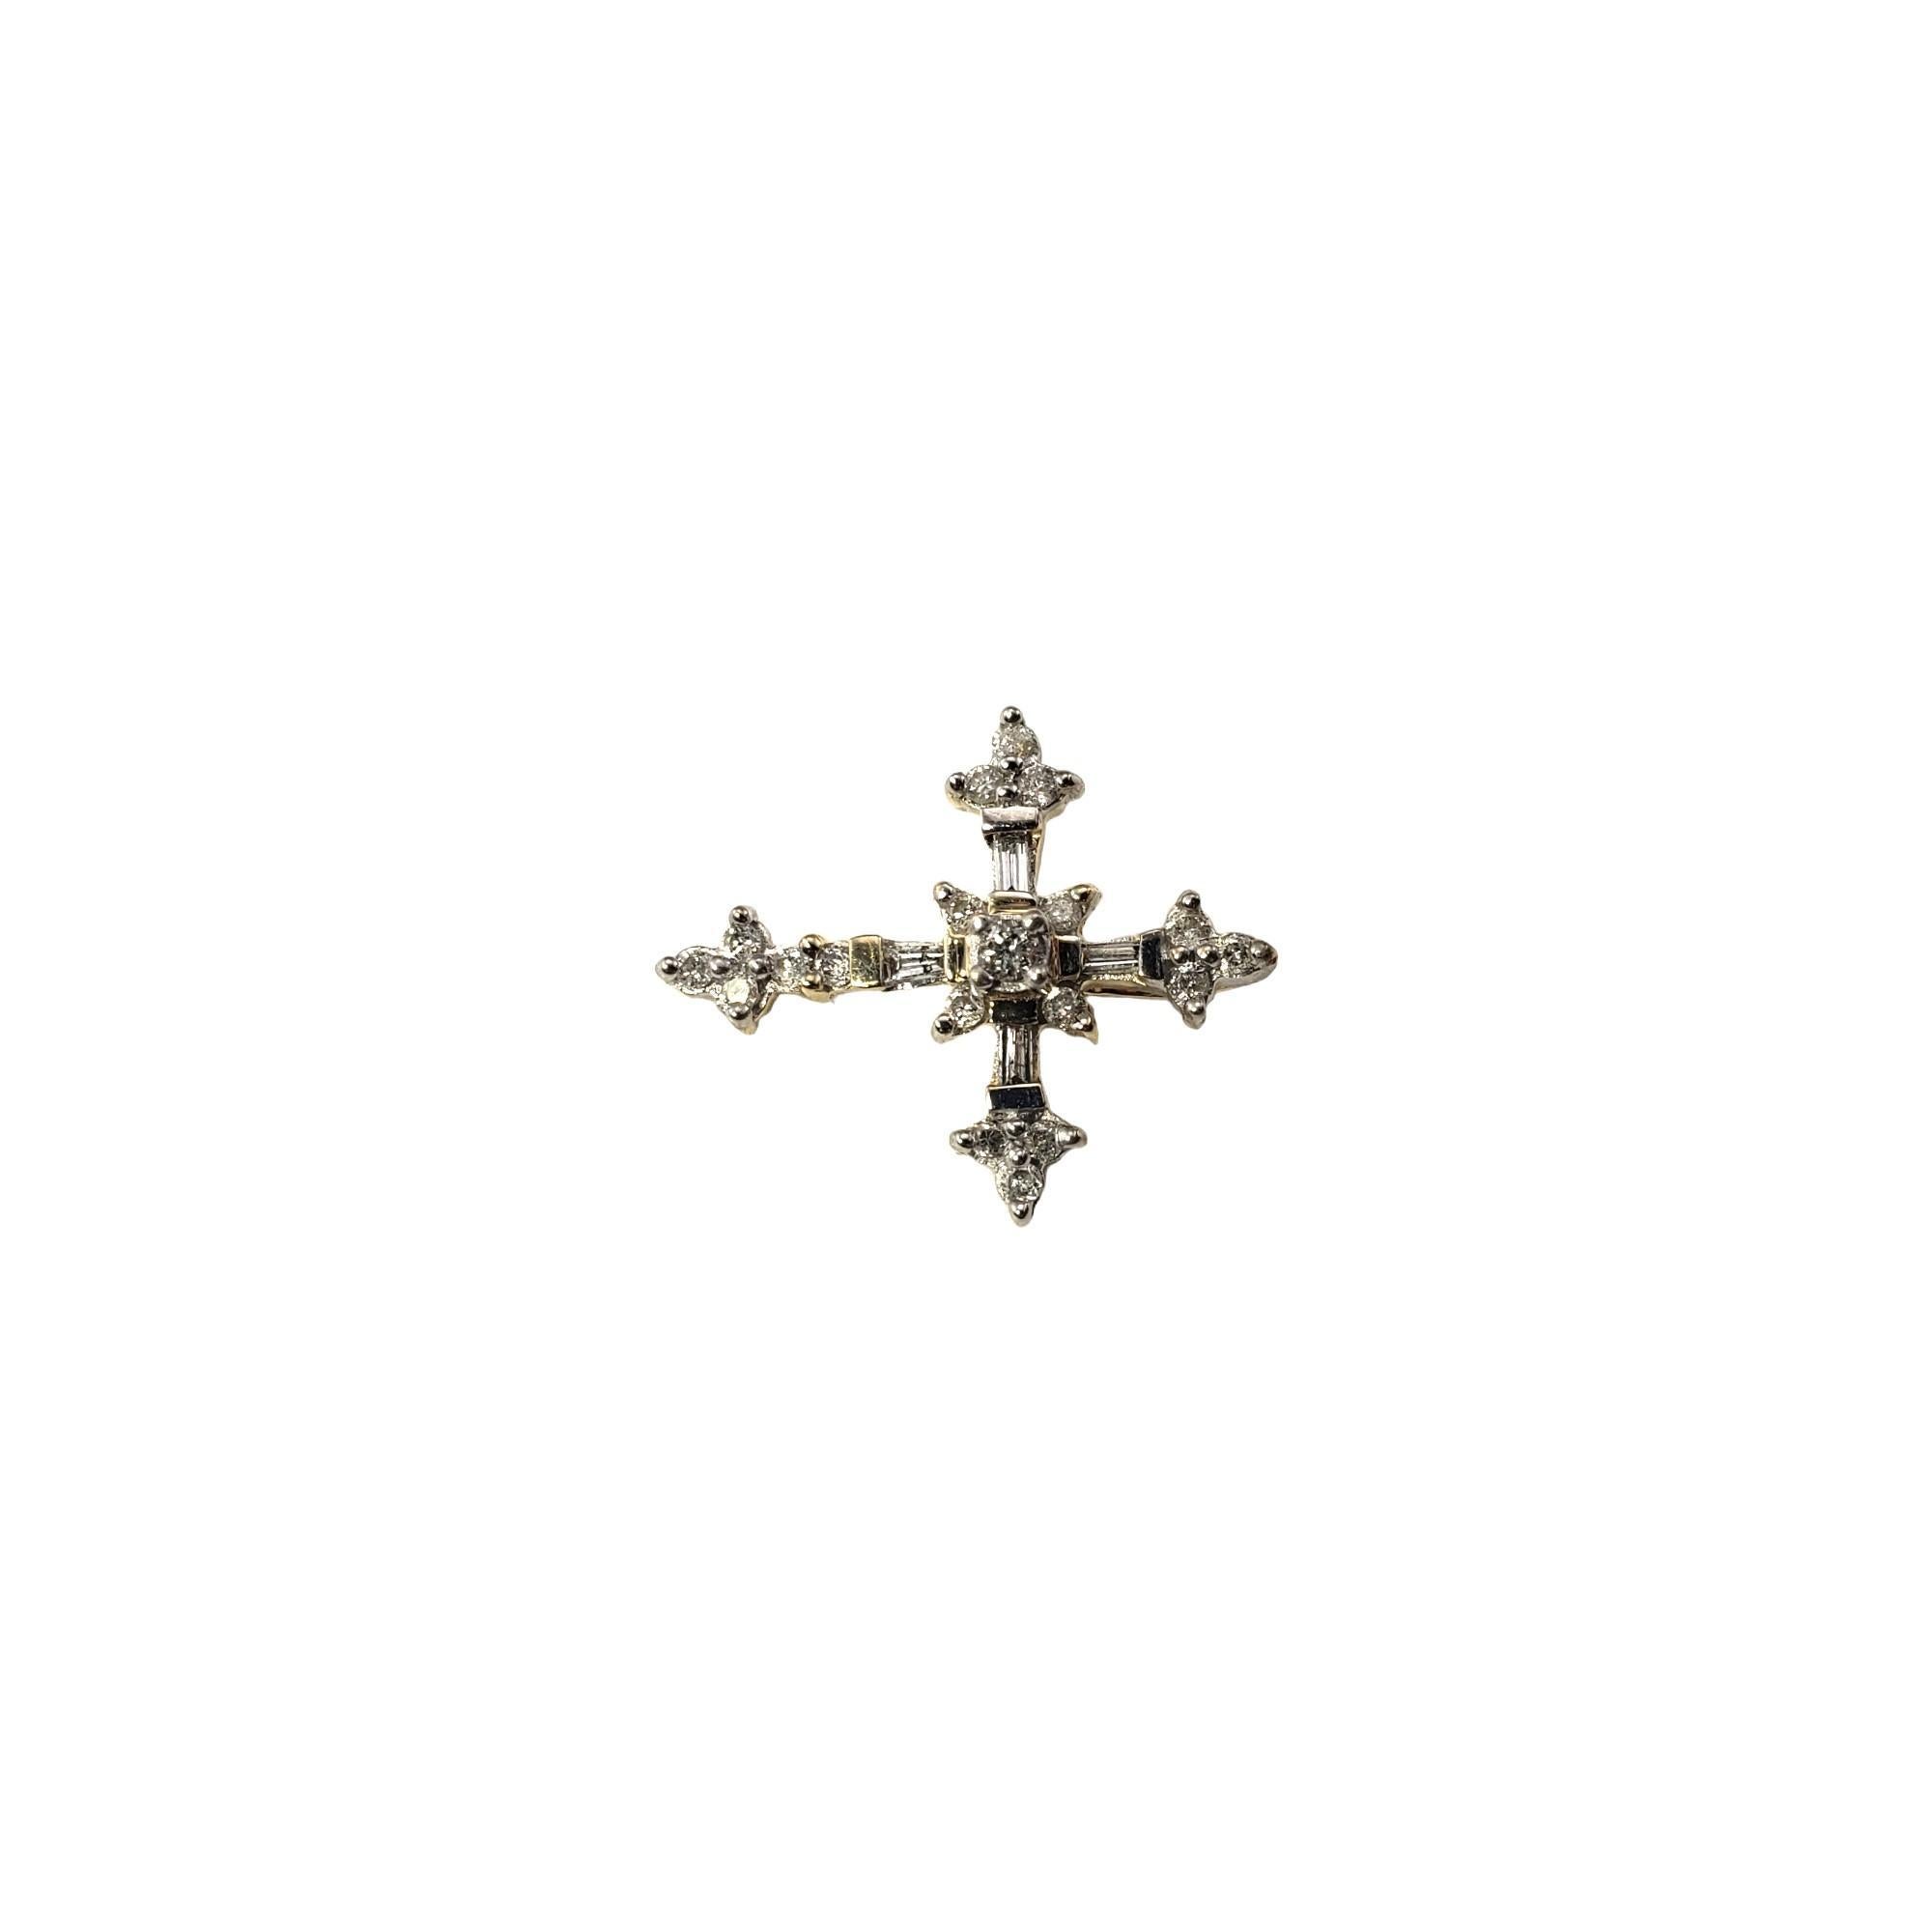 Vintage 14 Karat Yellow Gold and Diamond Cross Pendant-

This sparkling cross pendant features four baguette diamonds and 17 round brilliant cut diamonds set in classic 14K yellow gold.

*Chain not included.

Approximate total diamond weight:  .28